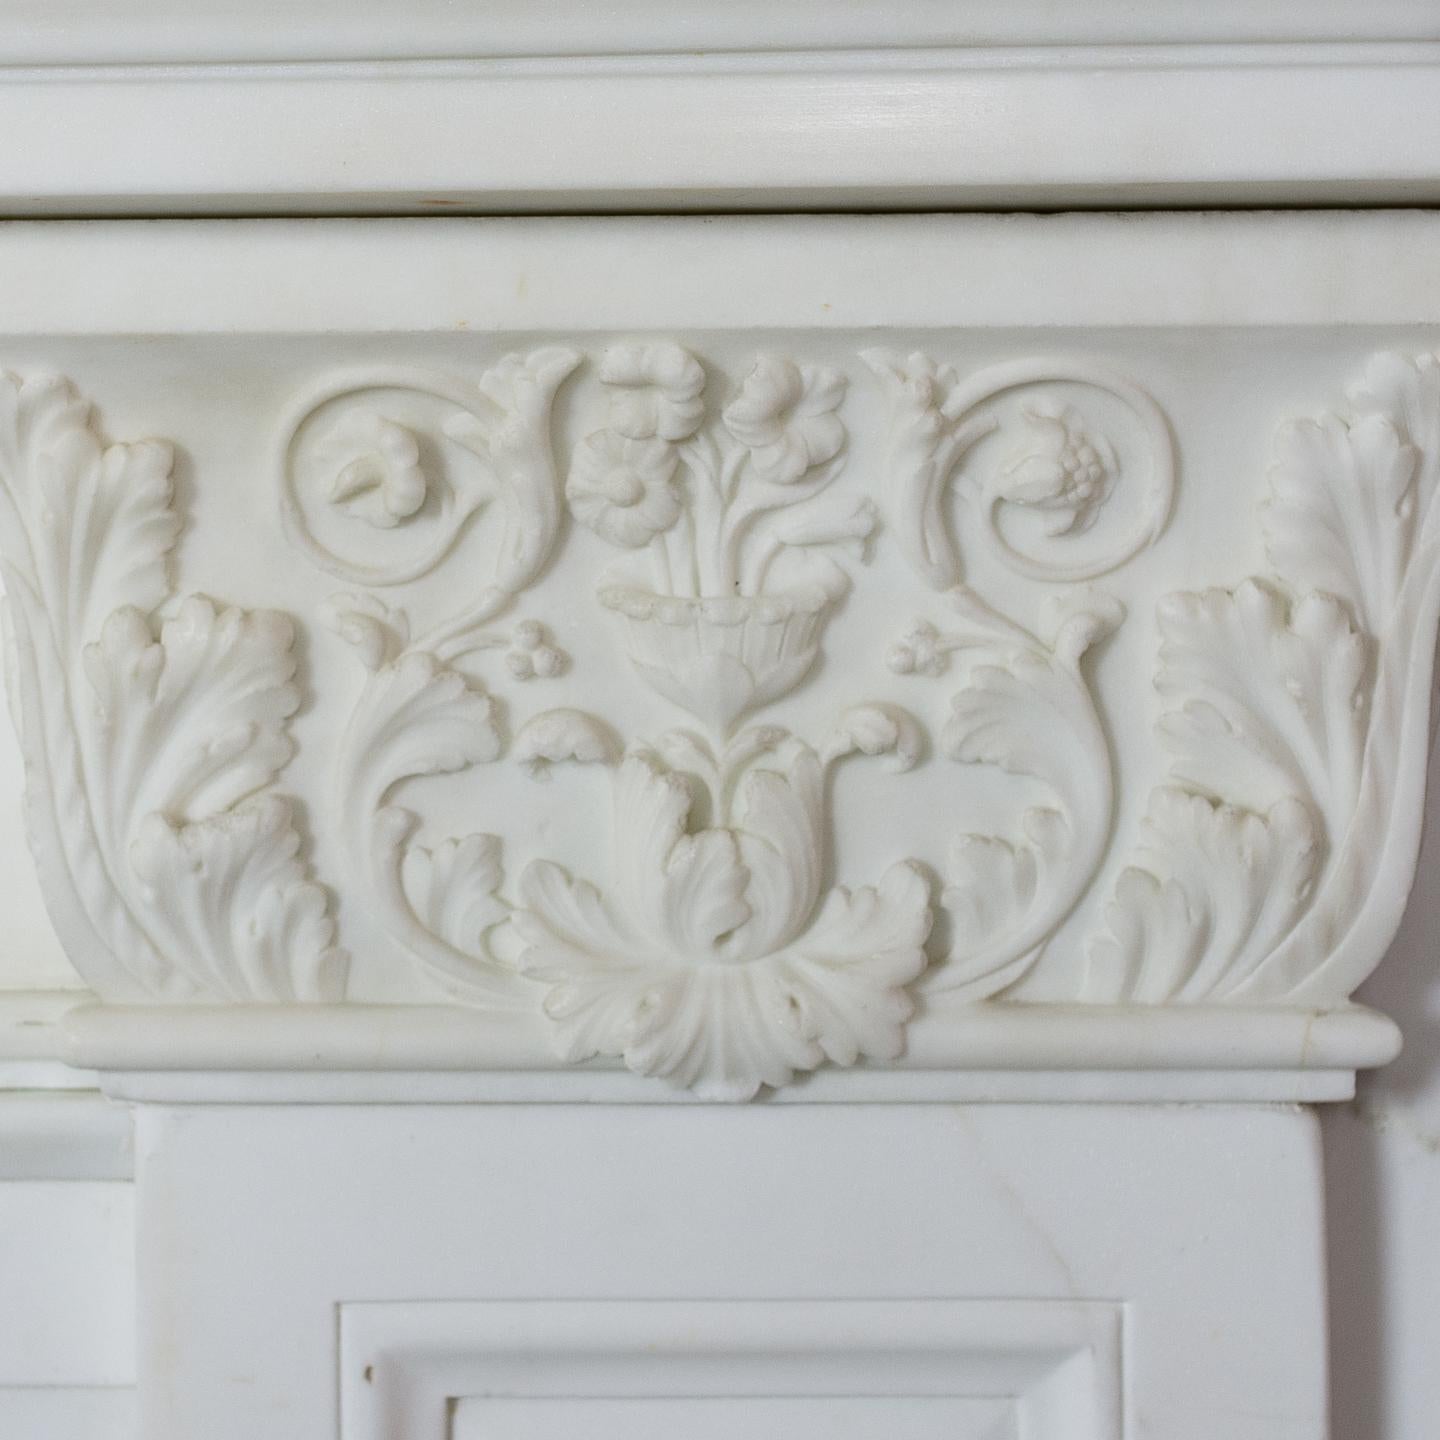 19th Century The Theatre Royal Covent Garden Chimneypiece - Regency Marble Fireplace